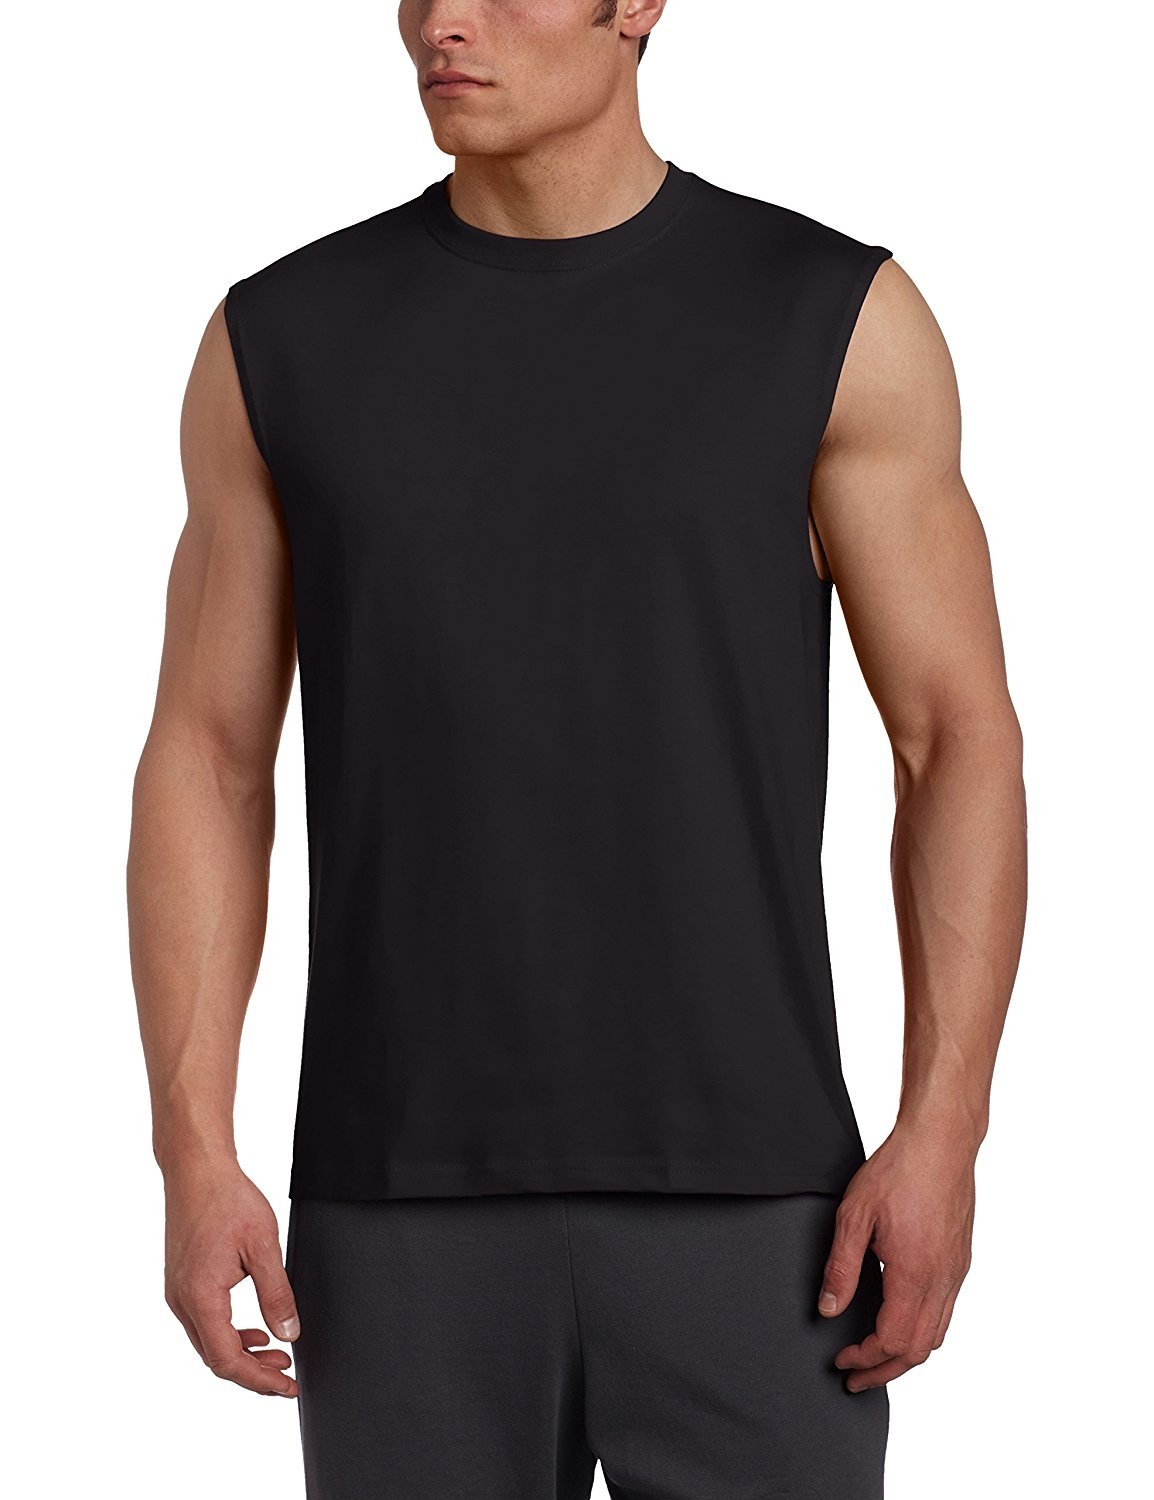 Russell Athletic Men's Muscle Tee Tshirt Cotton Basic Tank Top | eBay